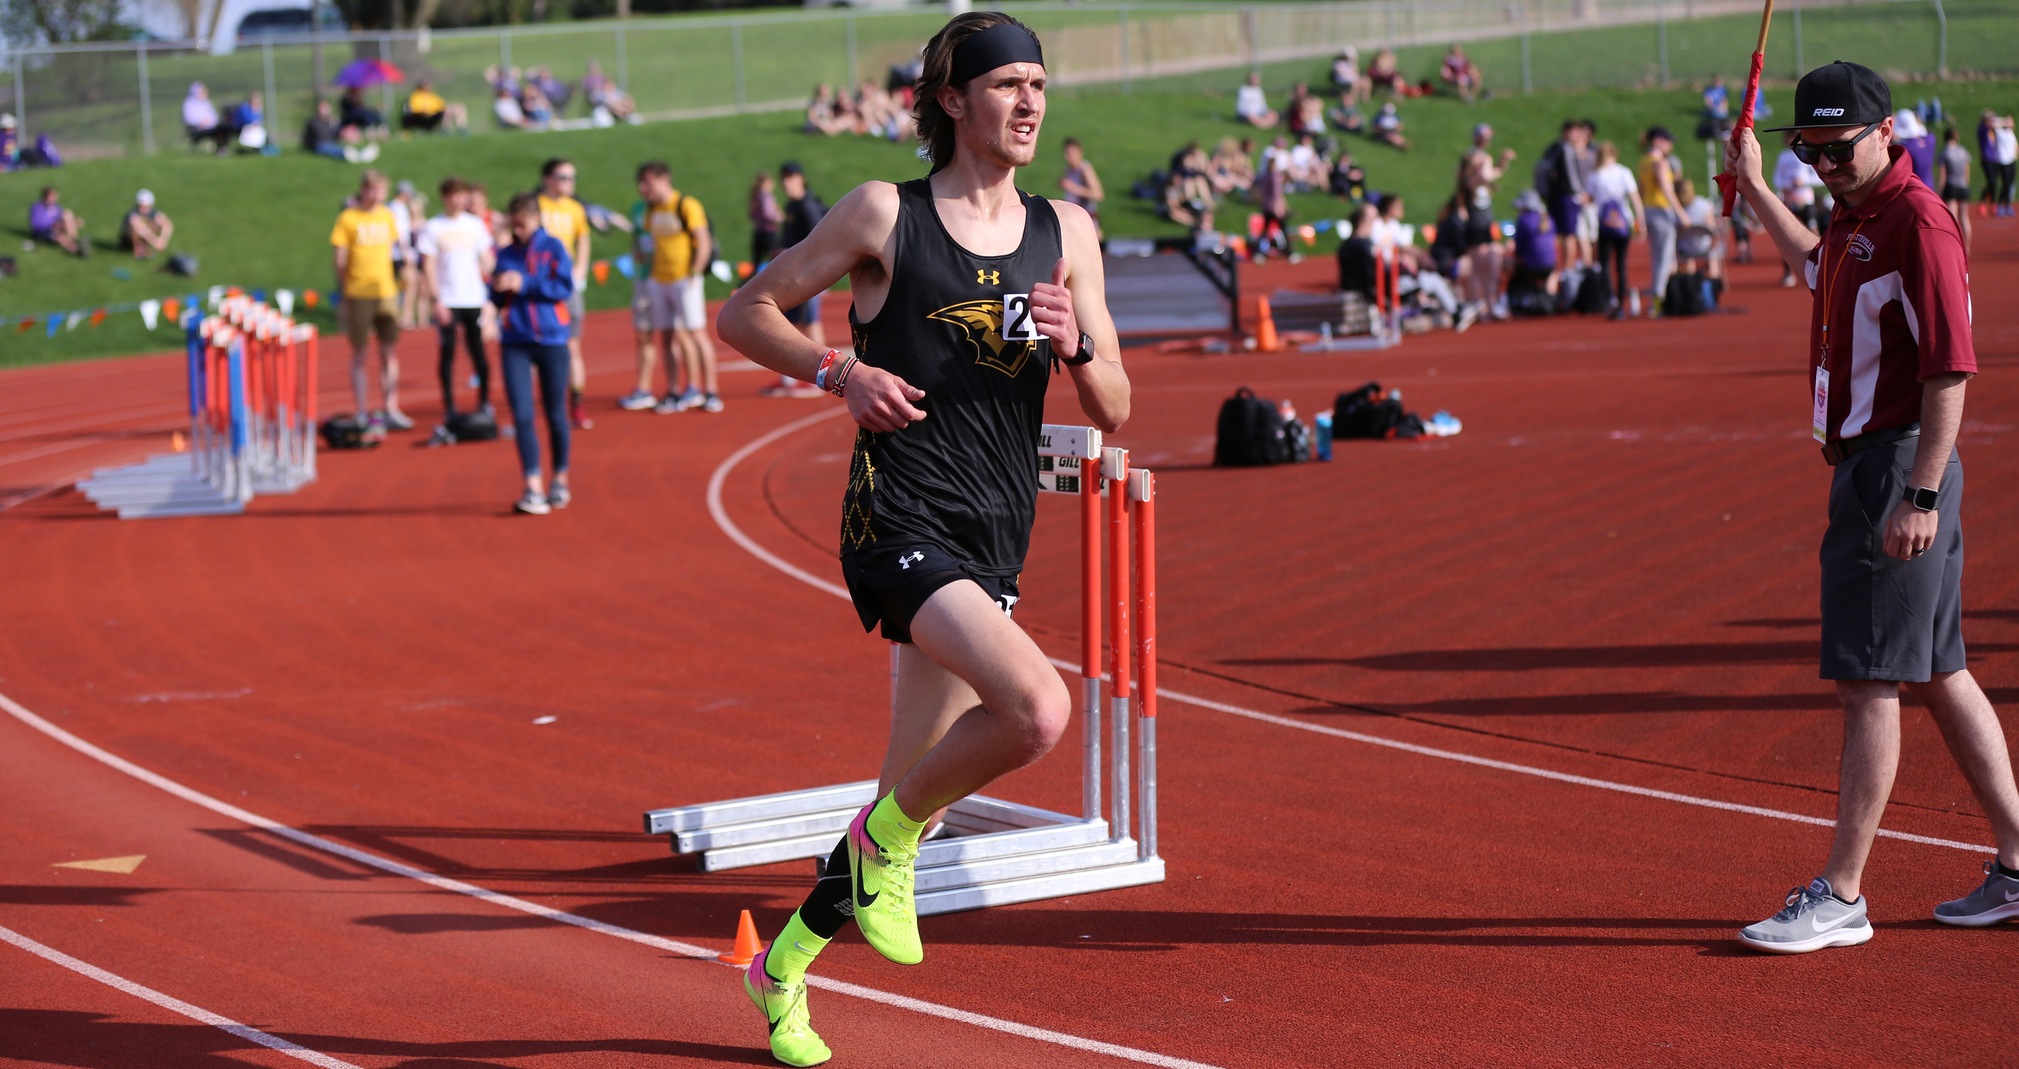 Cody Chadwick finished second to lead three UW-Oshkosh place winners in the 5,000-meter run at the UW-La Crosse Eagle Open.